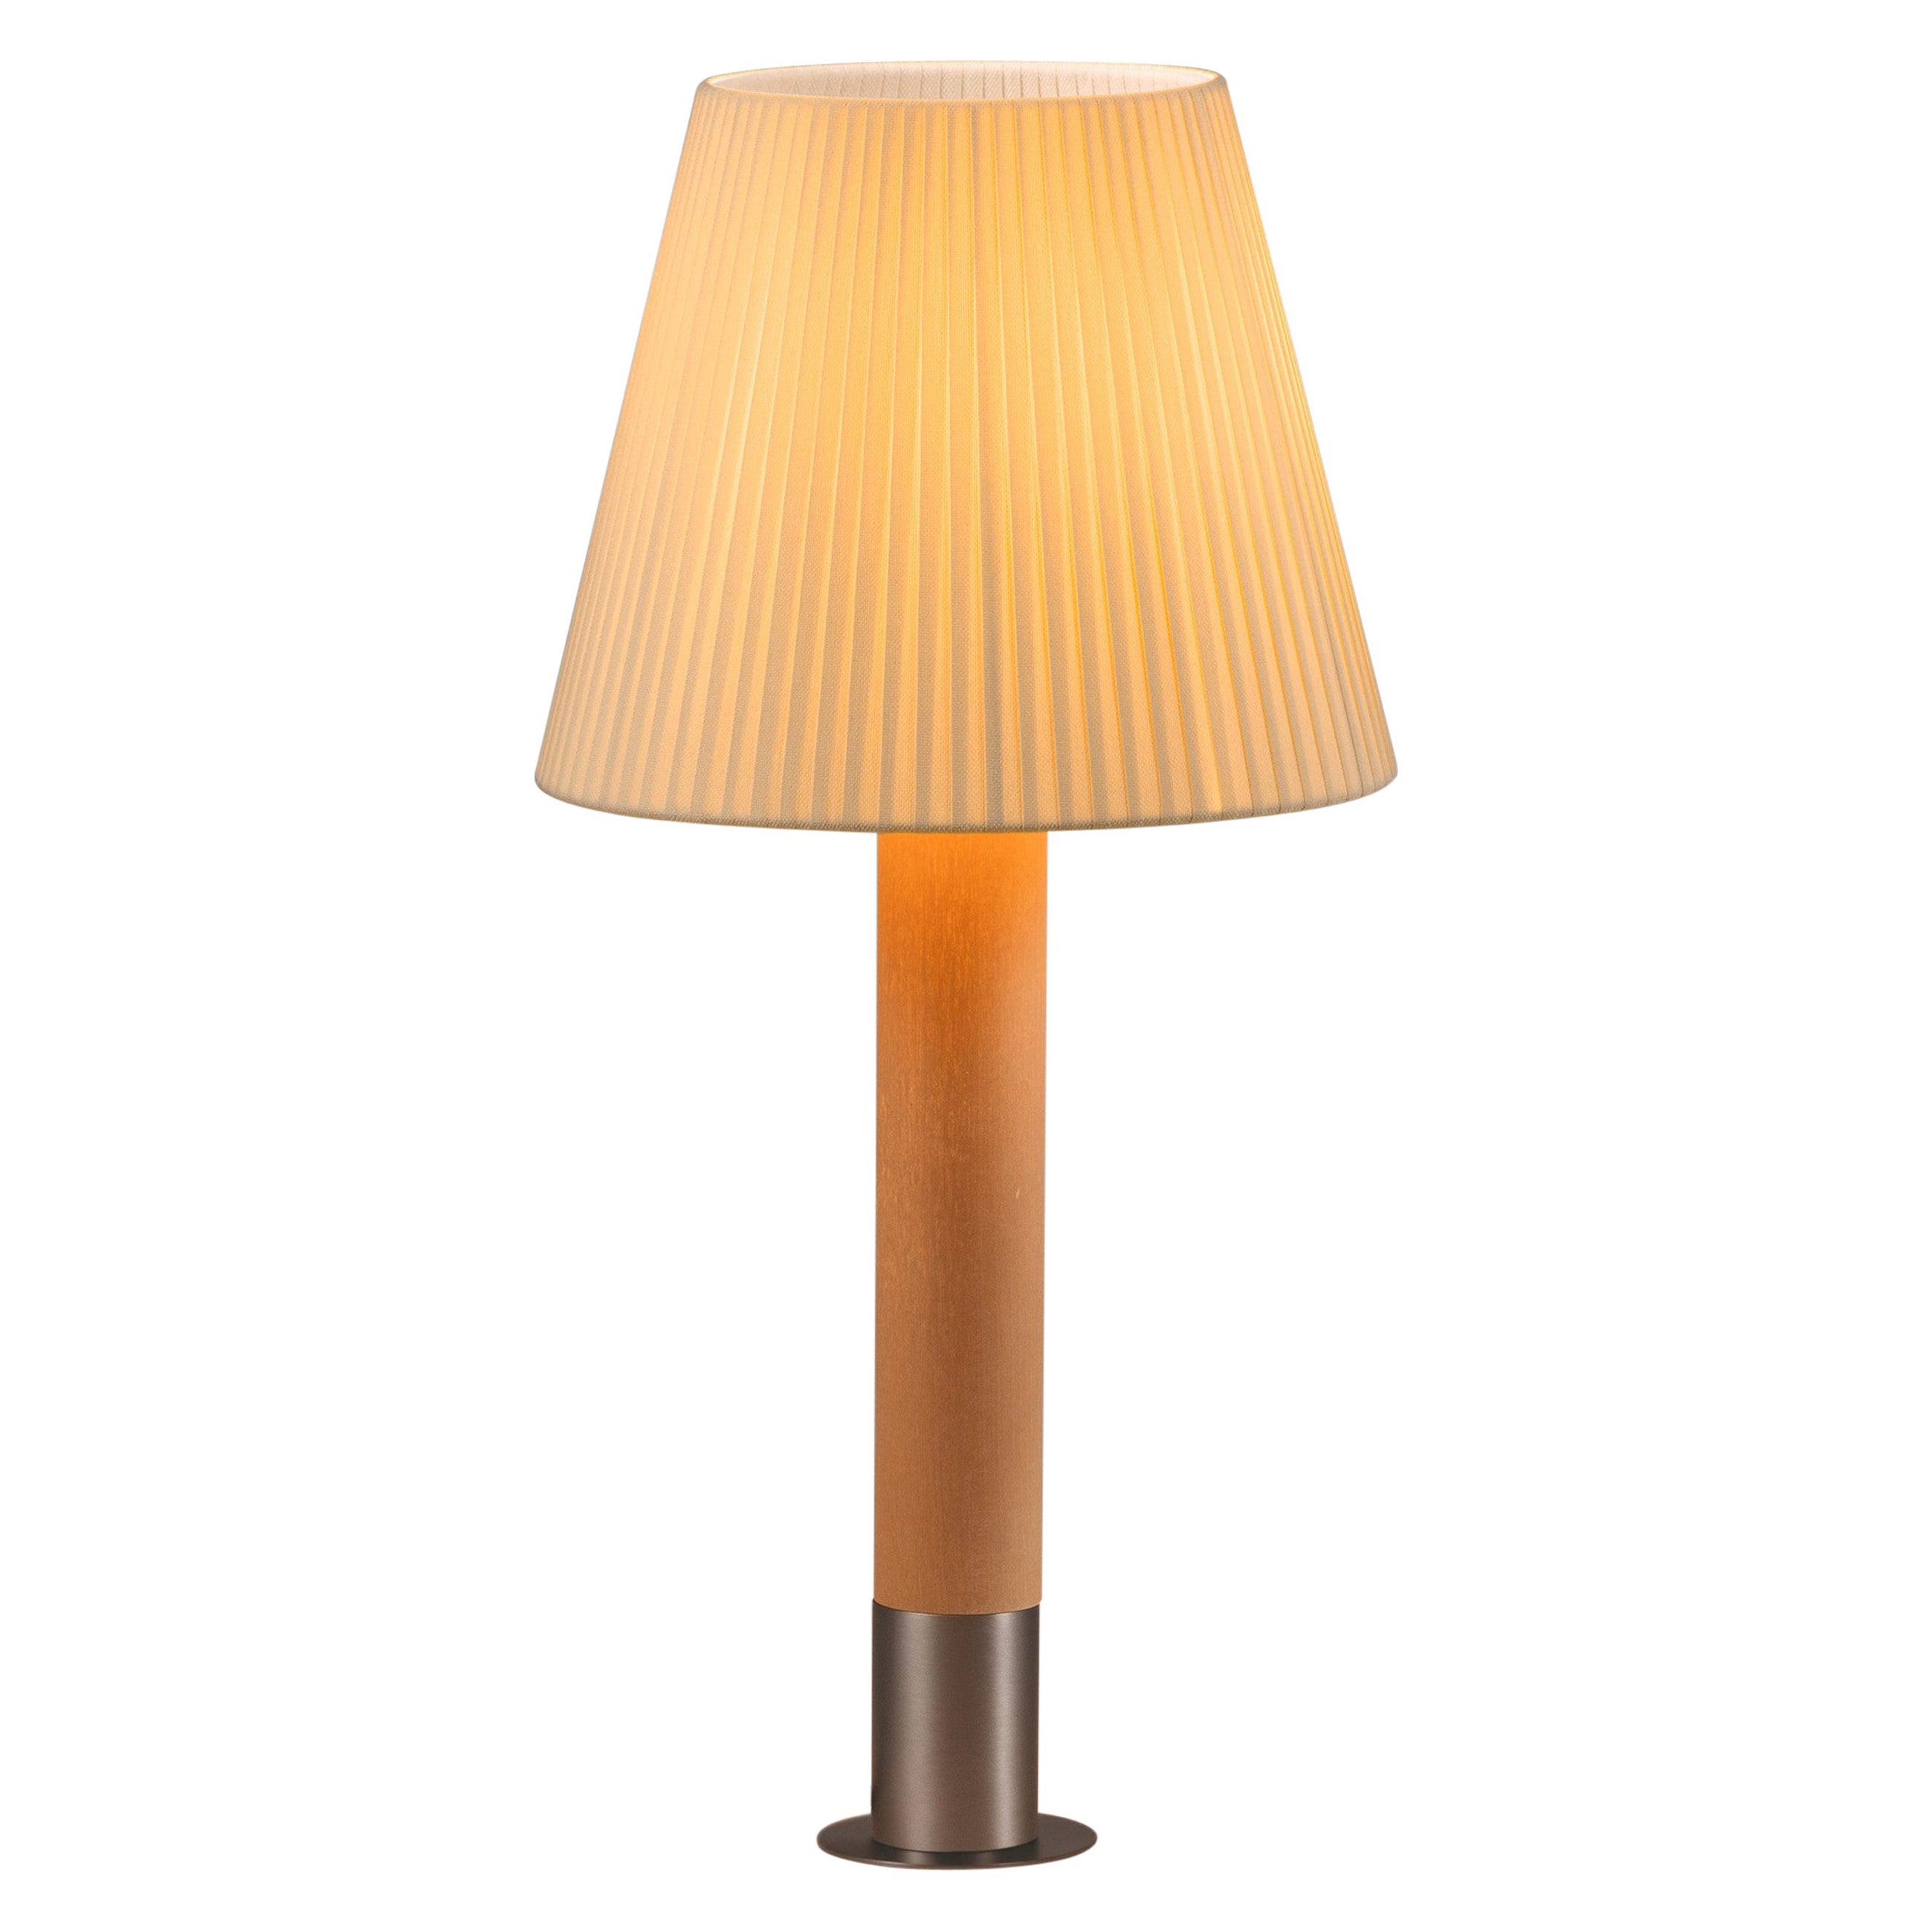 Nickel and Natural Básica M1 Table Lamp by Santiago Roqueta, Santa & Cole For Sale